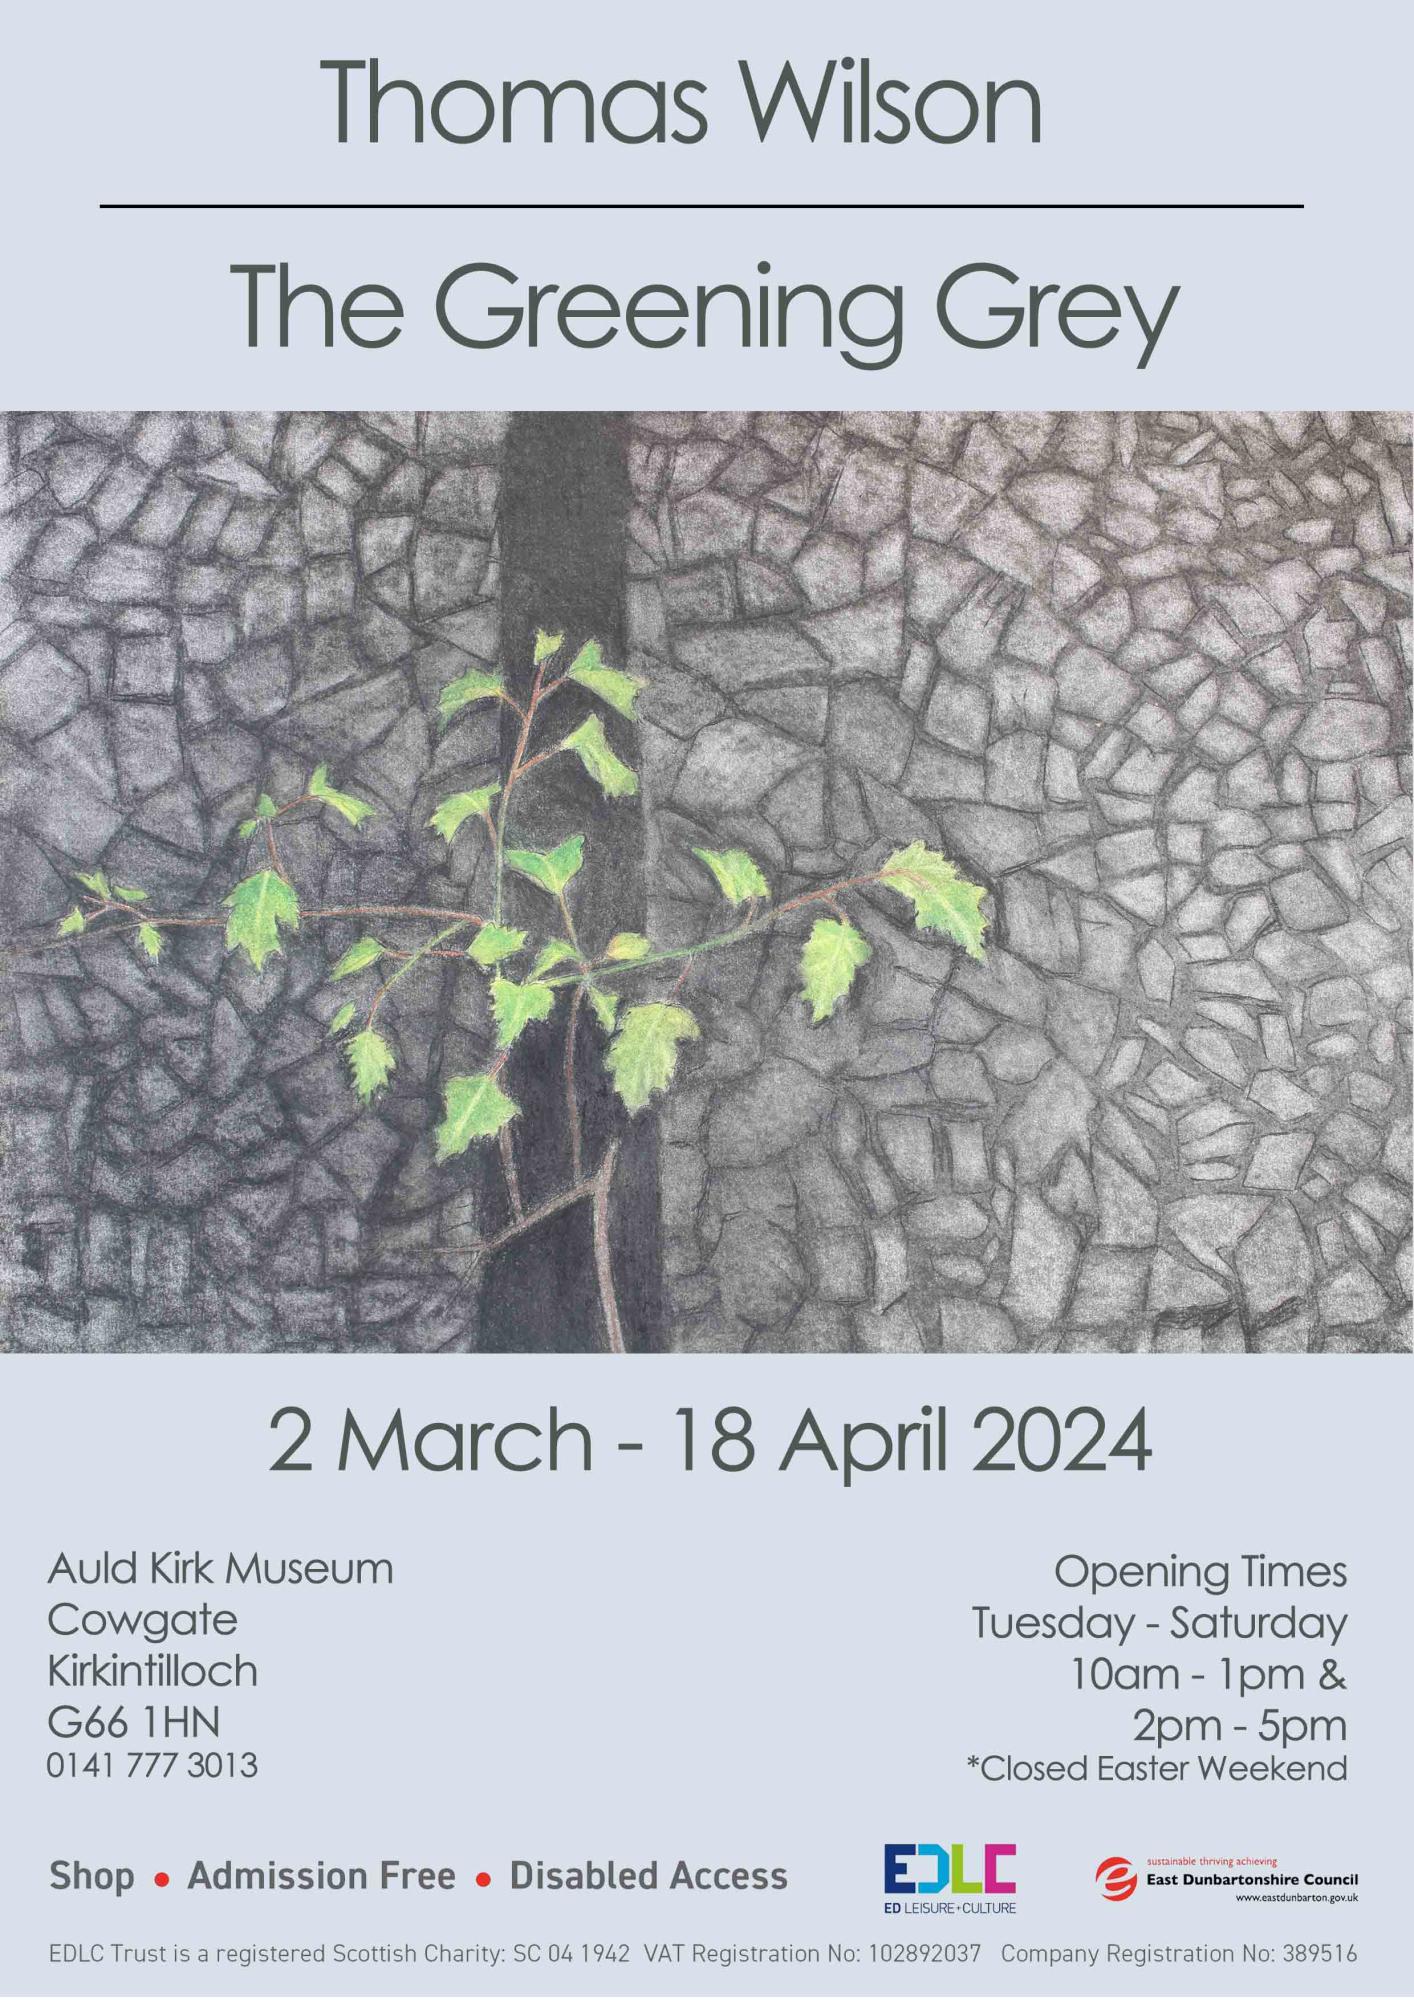 Poster: Artwork and text 'Thomas Wilson – The Greening Grey' is on at the Auld Kirk from 2 March to 18 April 2024. The Auld Kirk Museum – Cowgate, Kirkintilloch, G66 1HN – is open Tuesday-Saturday, 10am-1pm and 2-5pm. Closed Sunday and Monday. Admission is free.